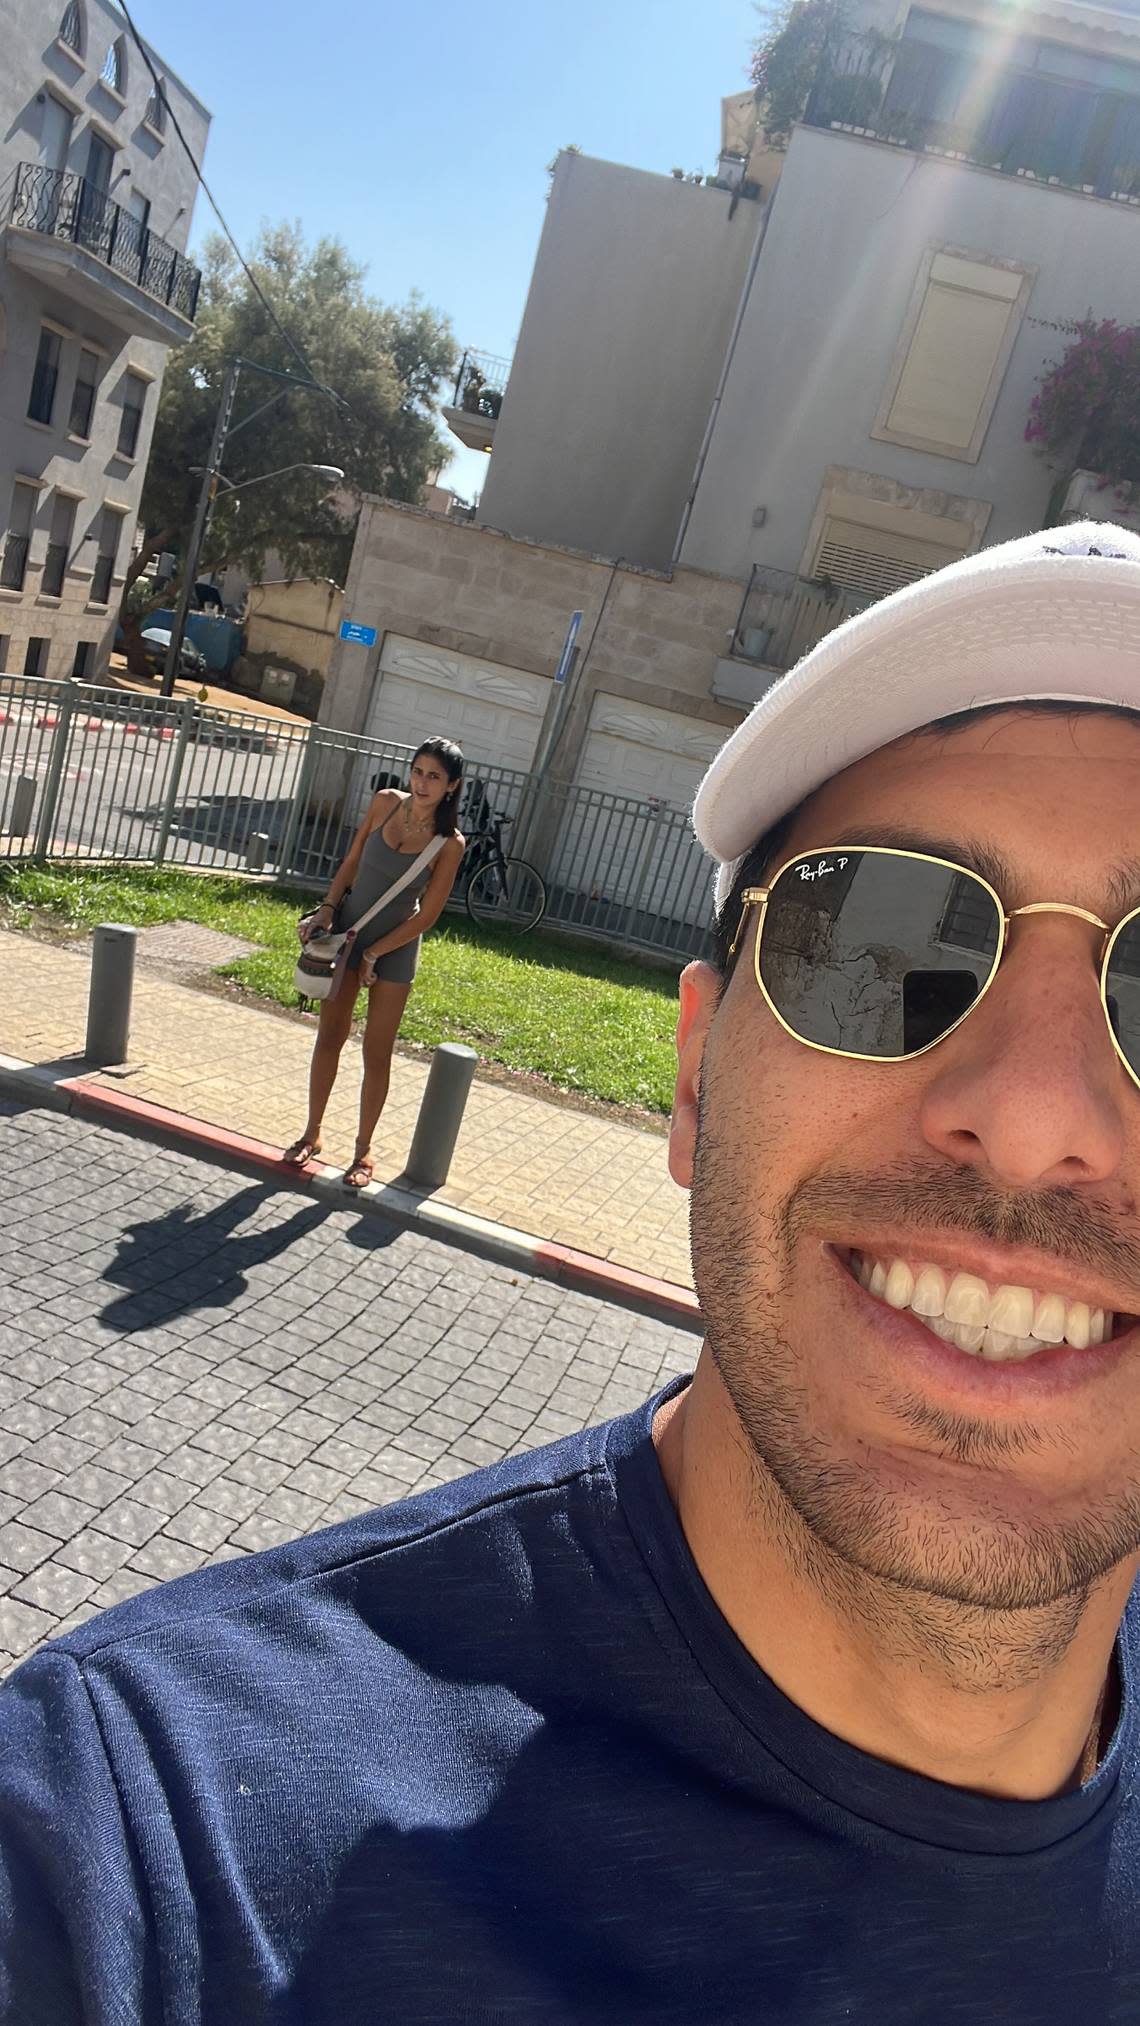 Guy Gil, a 29-year-old real estate developer from Sunny Isles Beach, was visiting his family in Tel Aviv at the time of the Hamas attacks. The woman behind him is his 22-year-old cousin, who was attending the Supernova Music Festival near the Gaza Strip on Saturday, Oct. 7, 2023, where Hamas militants killed more than 260 Israelis and took people hostage. She was injured and hospitalized. The photo was taken about 10 hours before the festival.